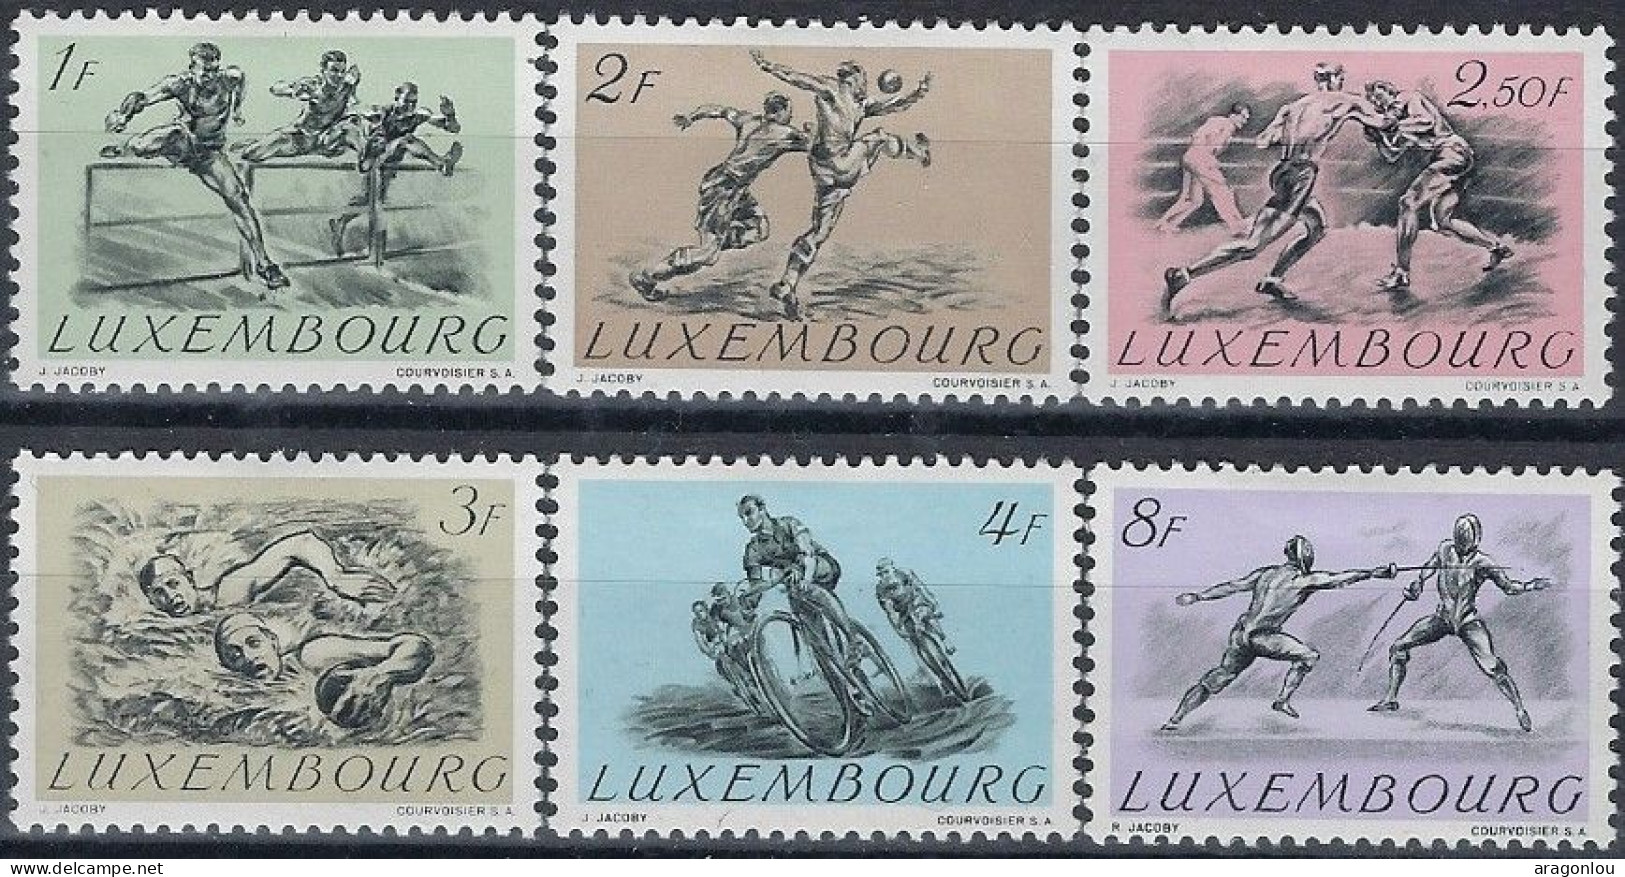 Luxembourg - Luxemburg -  Timbre   Série  Olympique   1952   VC. 50,-   * - Usados